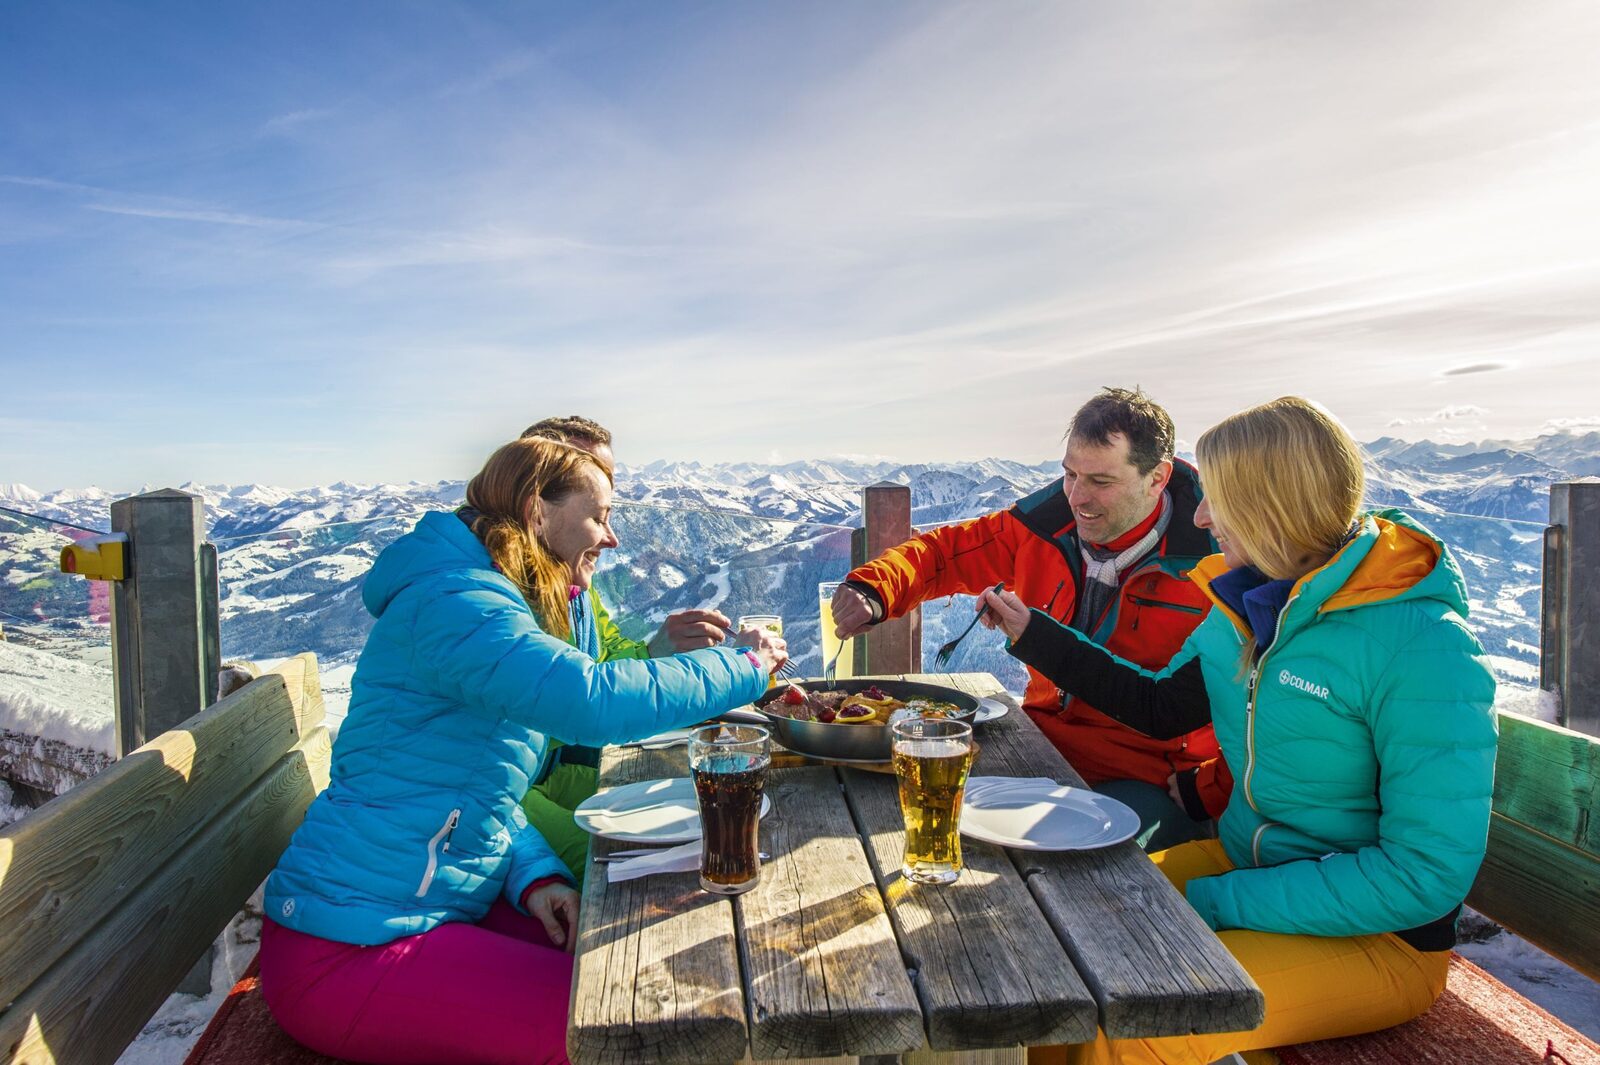 Ski holiday with friends - food and drinks